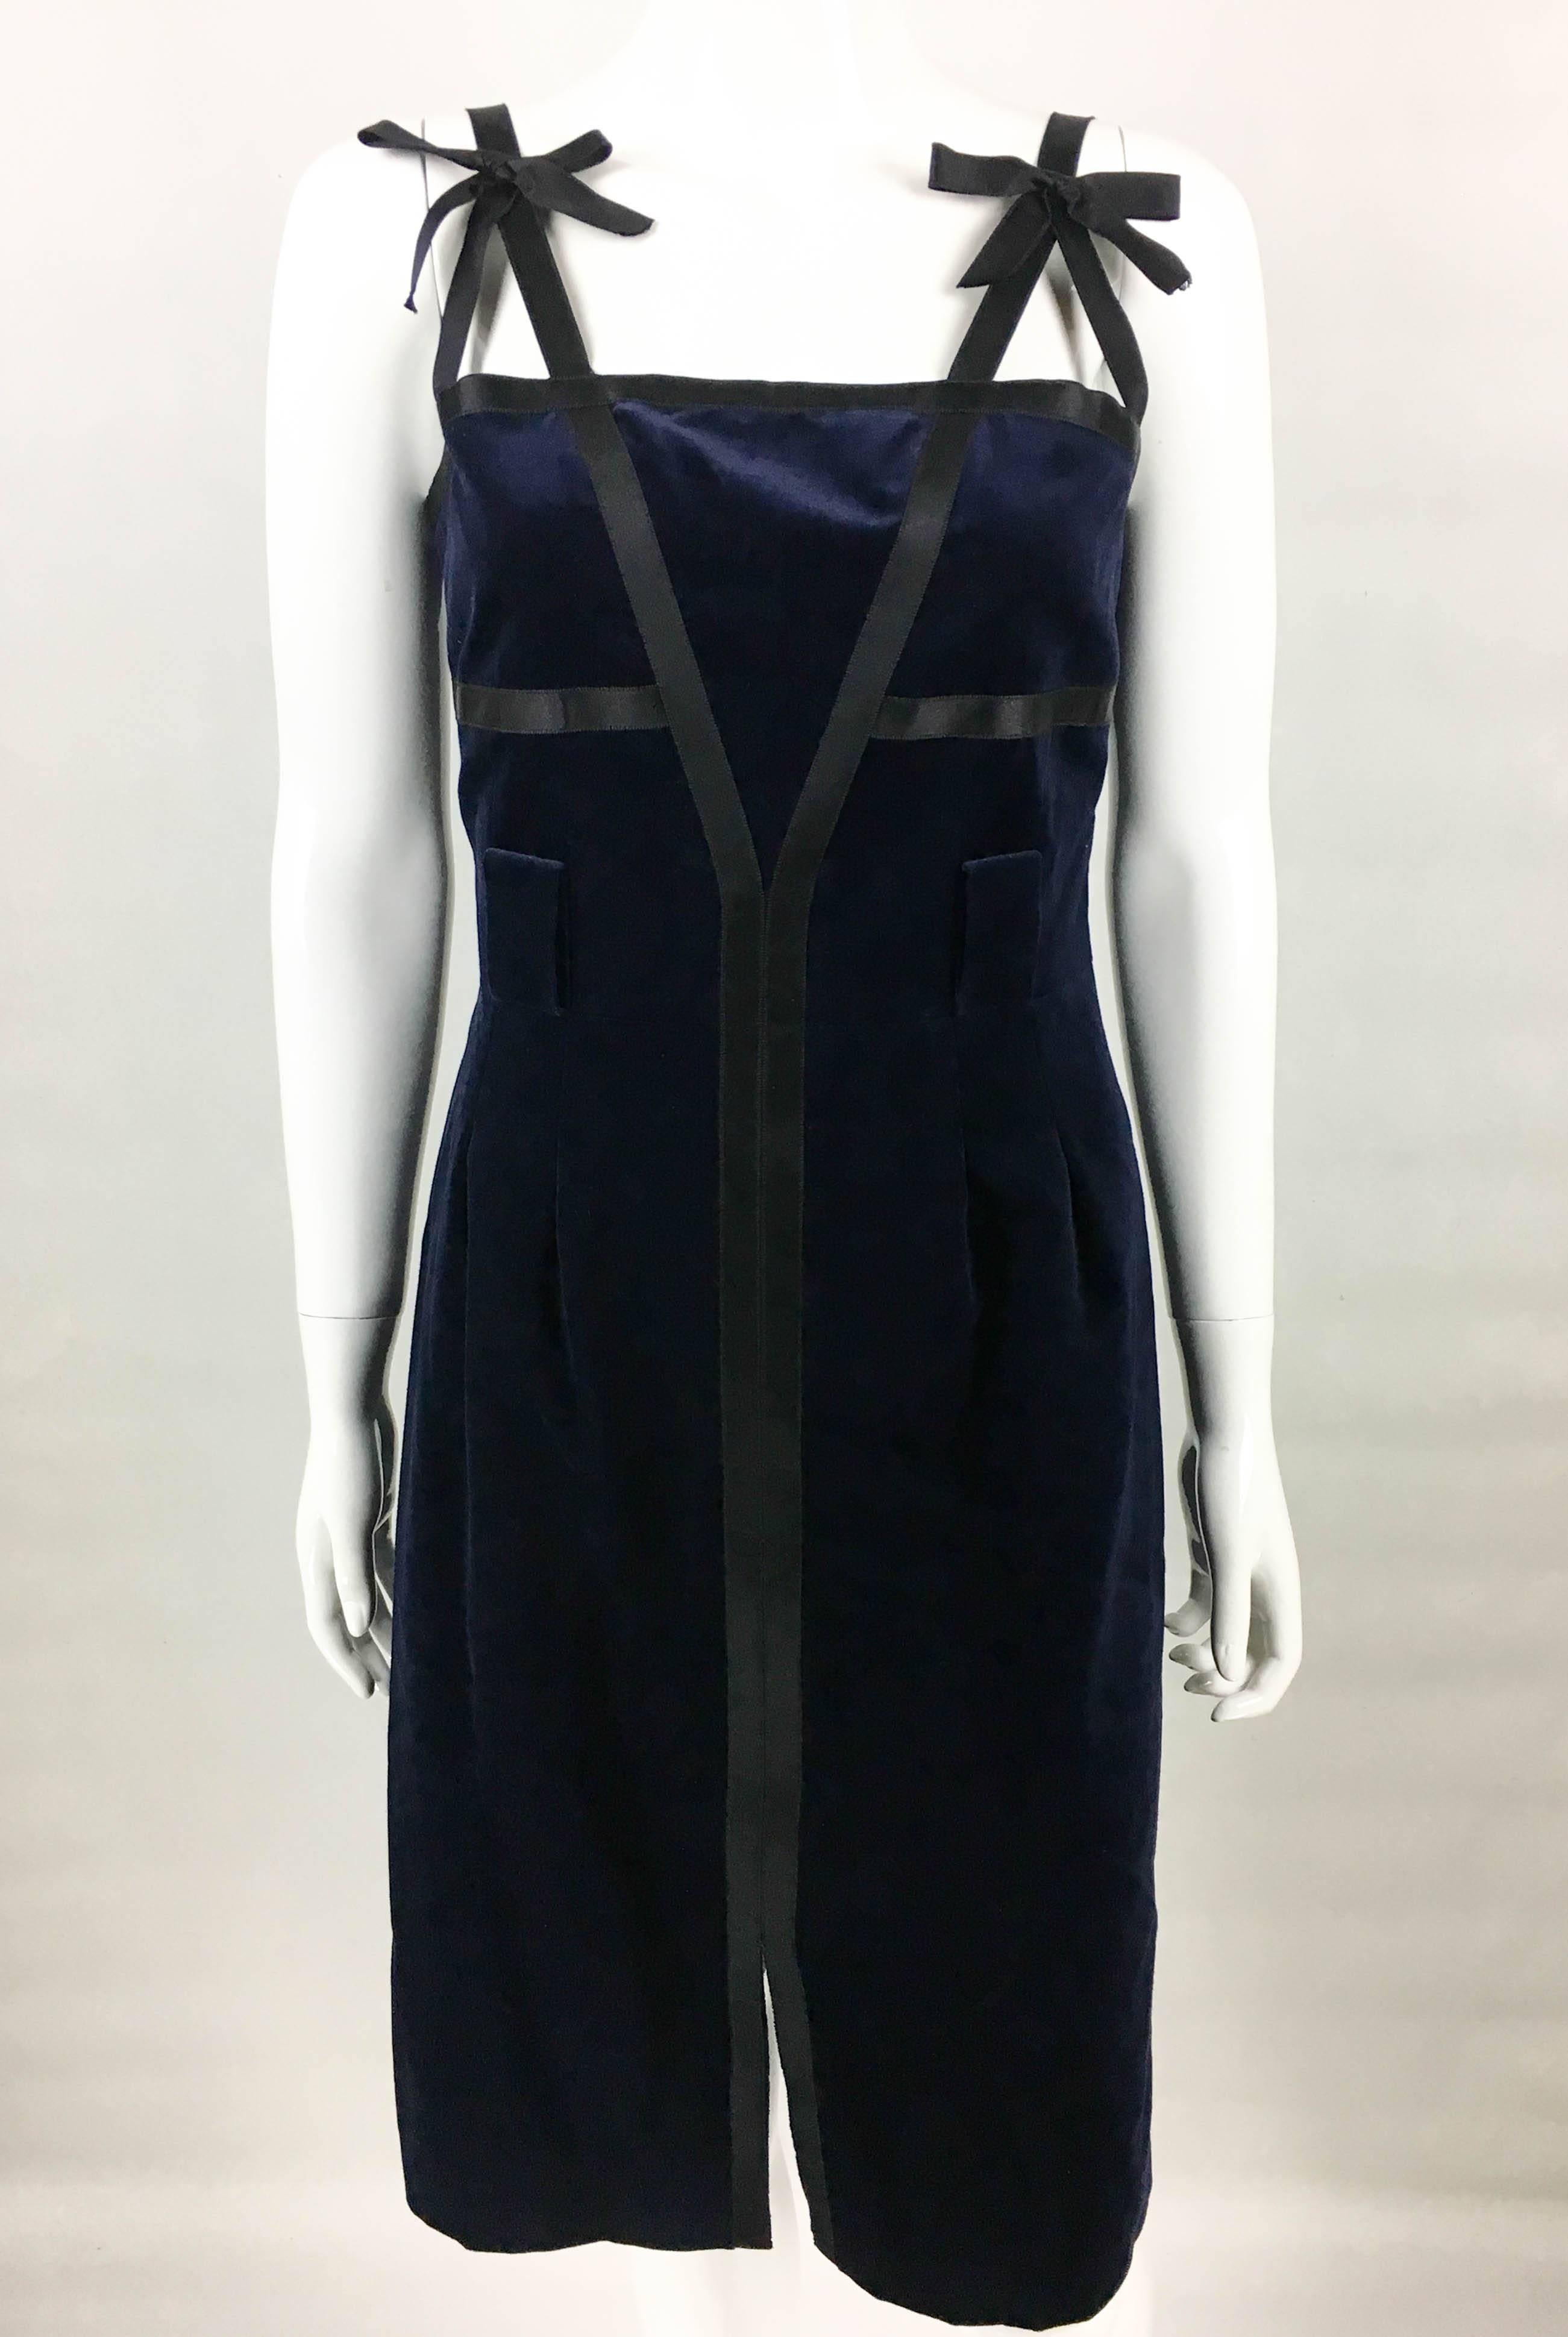 Chanel 2007 Runway Midnight Blue Velvet Cocktail Dress In Excellent Condition In London, Chelsea